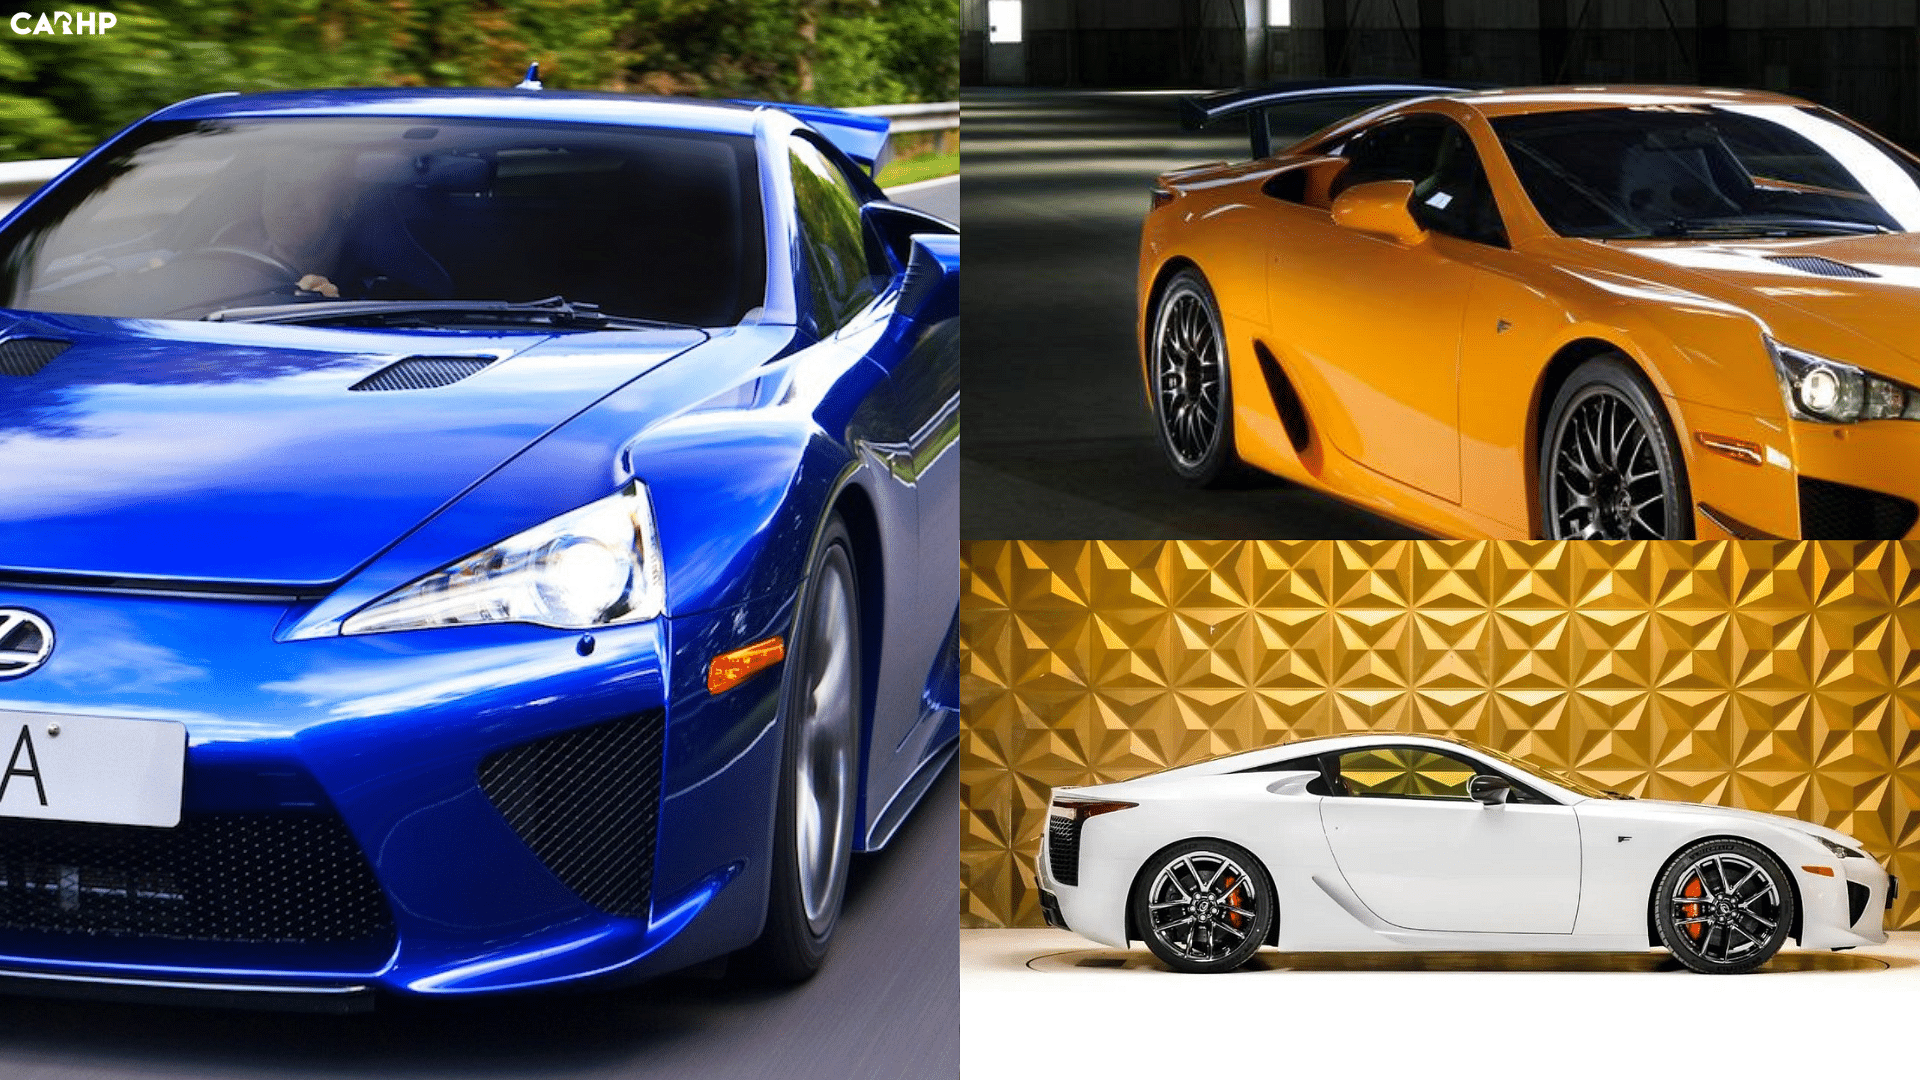 10 Things You Didn't Know About the Legendary Lexus LFA